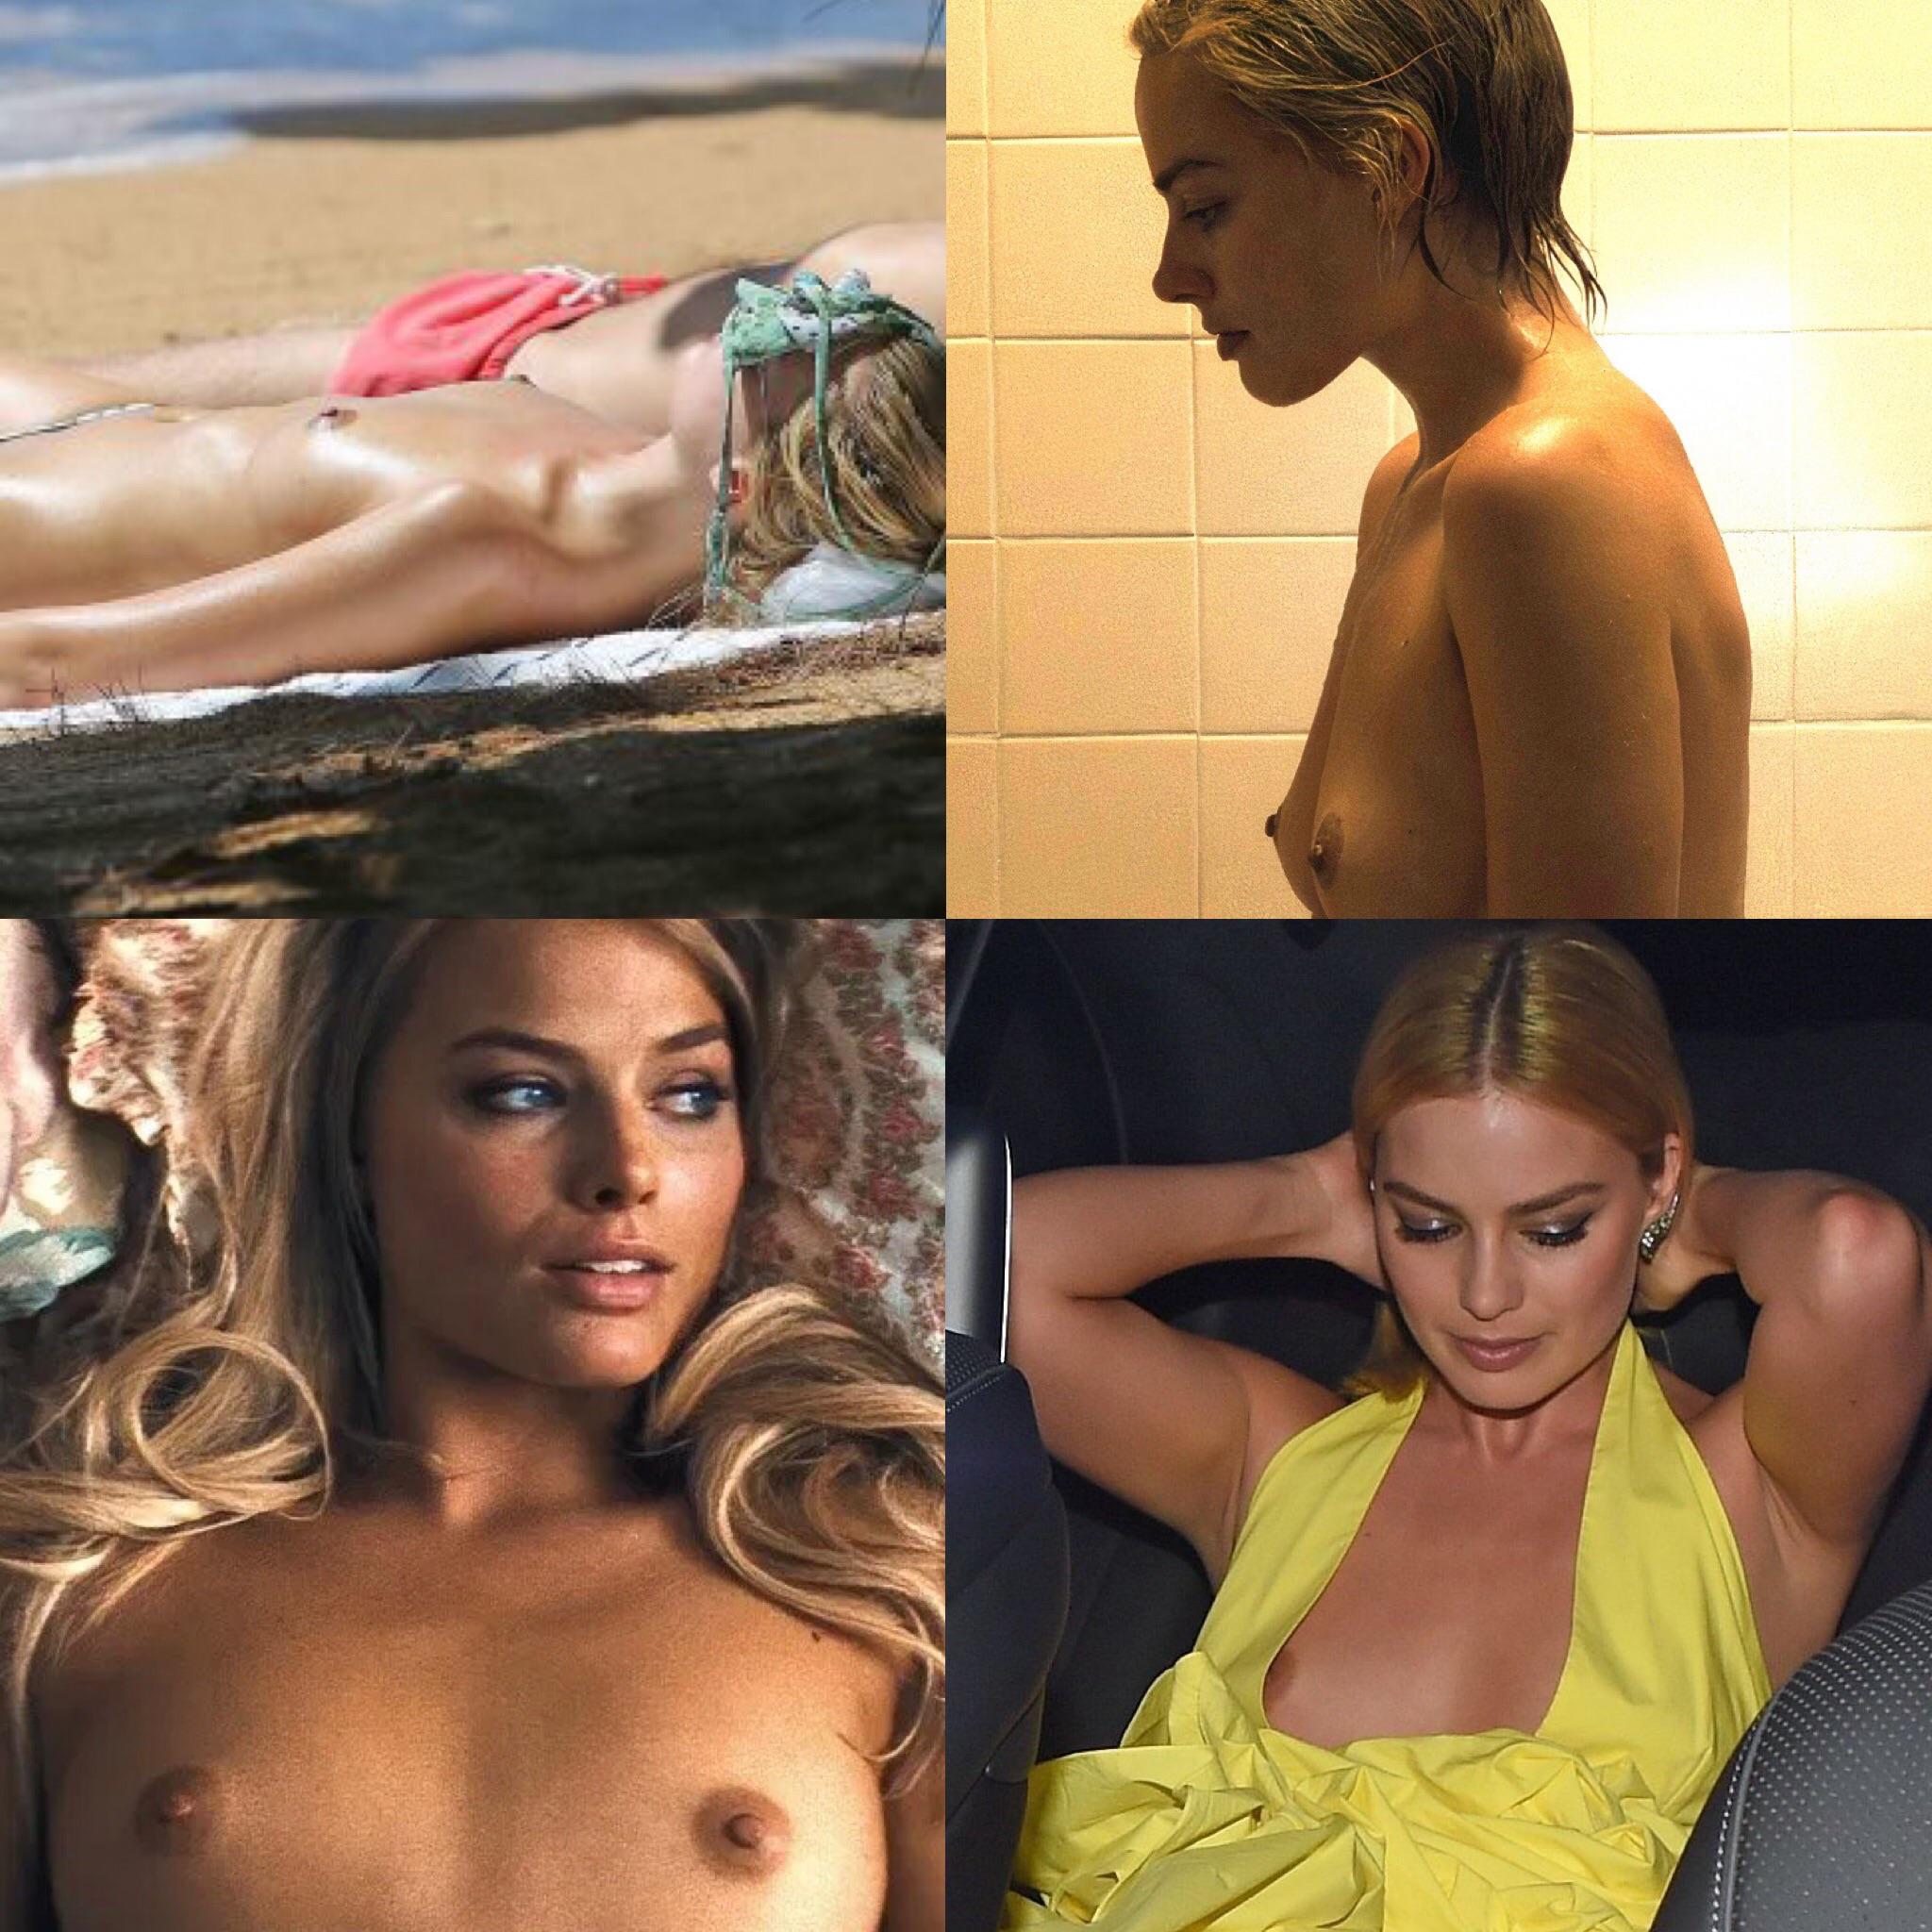 Margot Robbie‘s nipples are simply perfection and unbelievable beautiful